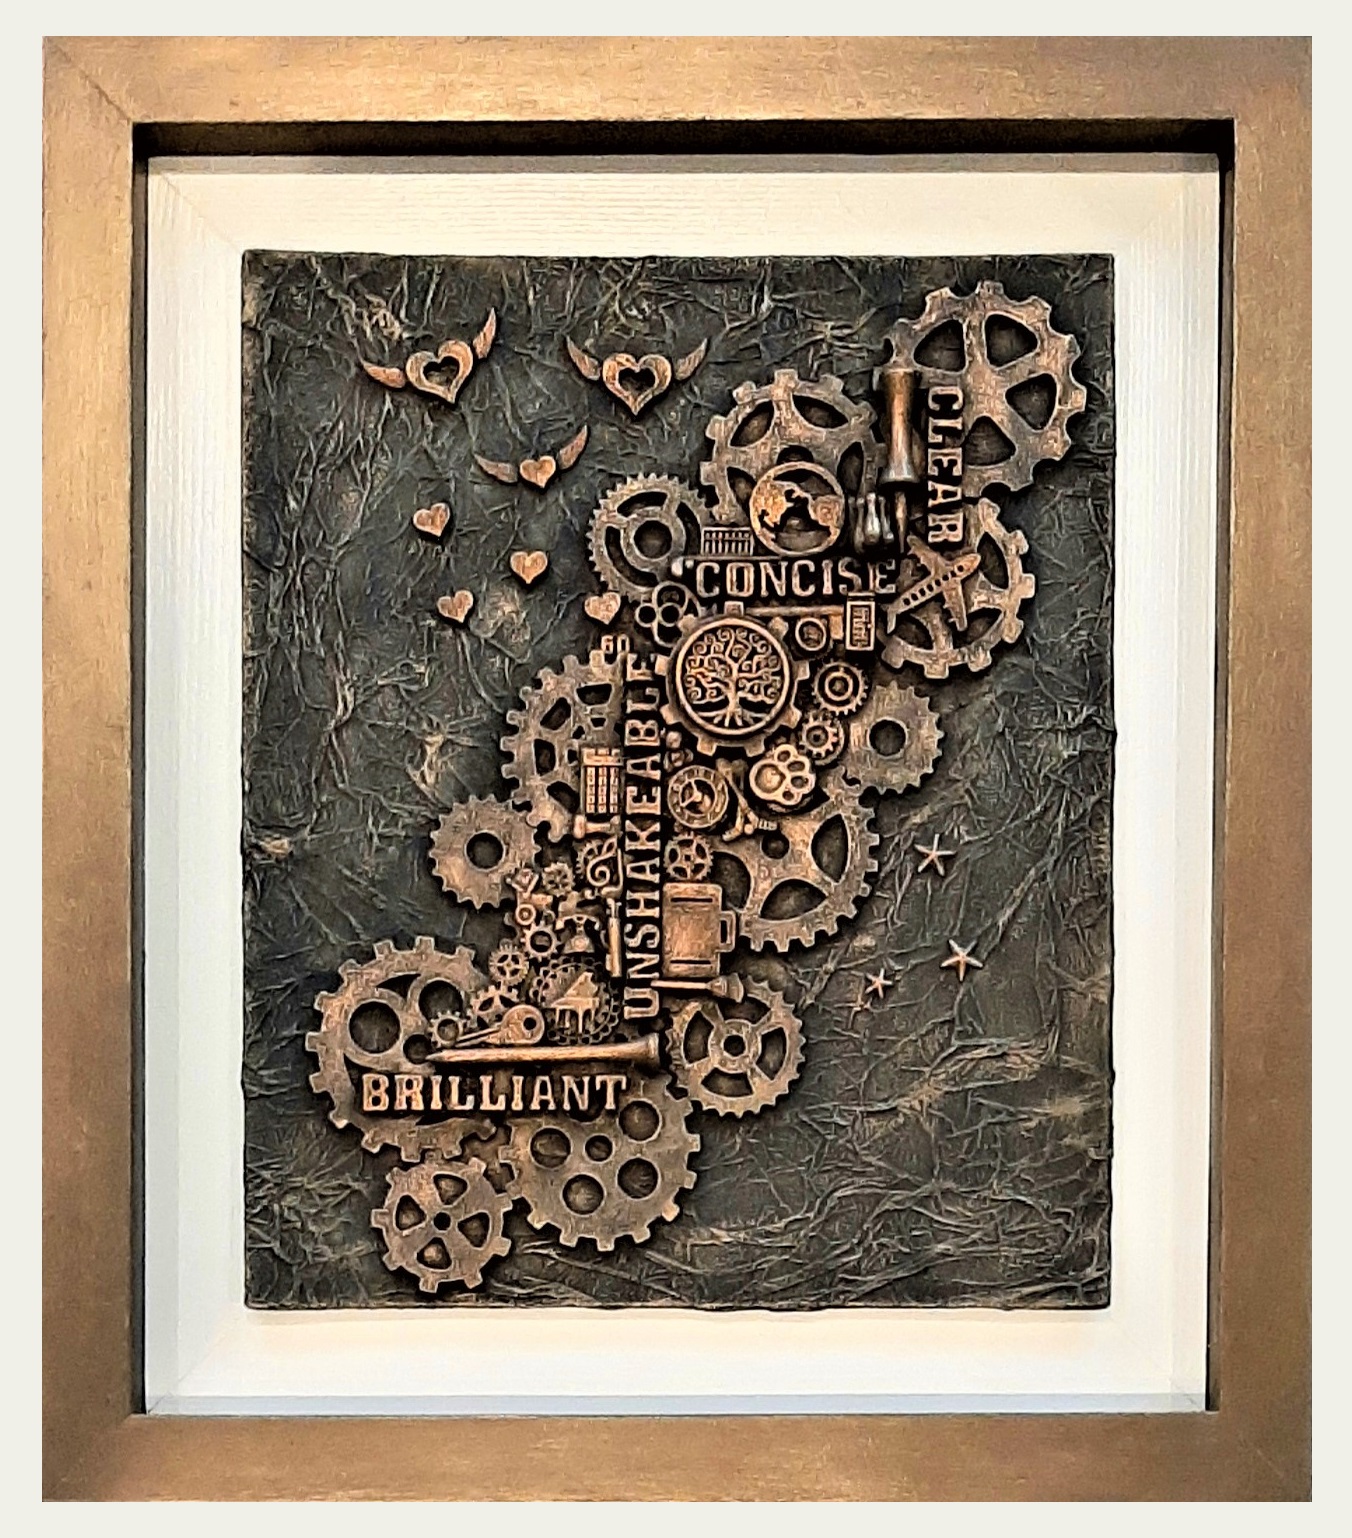 Personalised commissioned mixed media with handmade wooden frame, 35cm x 30cm